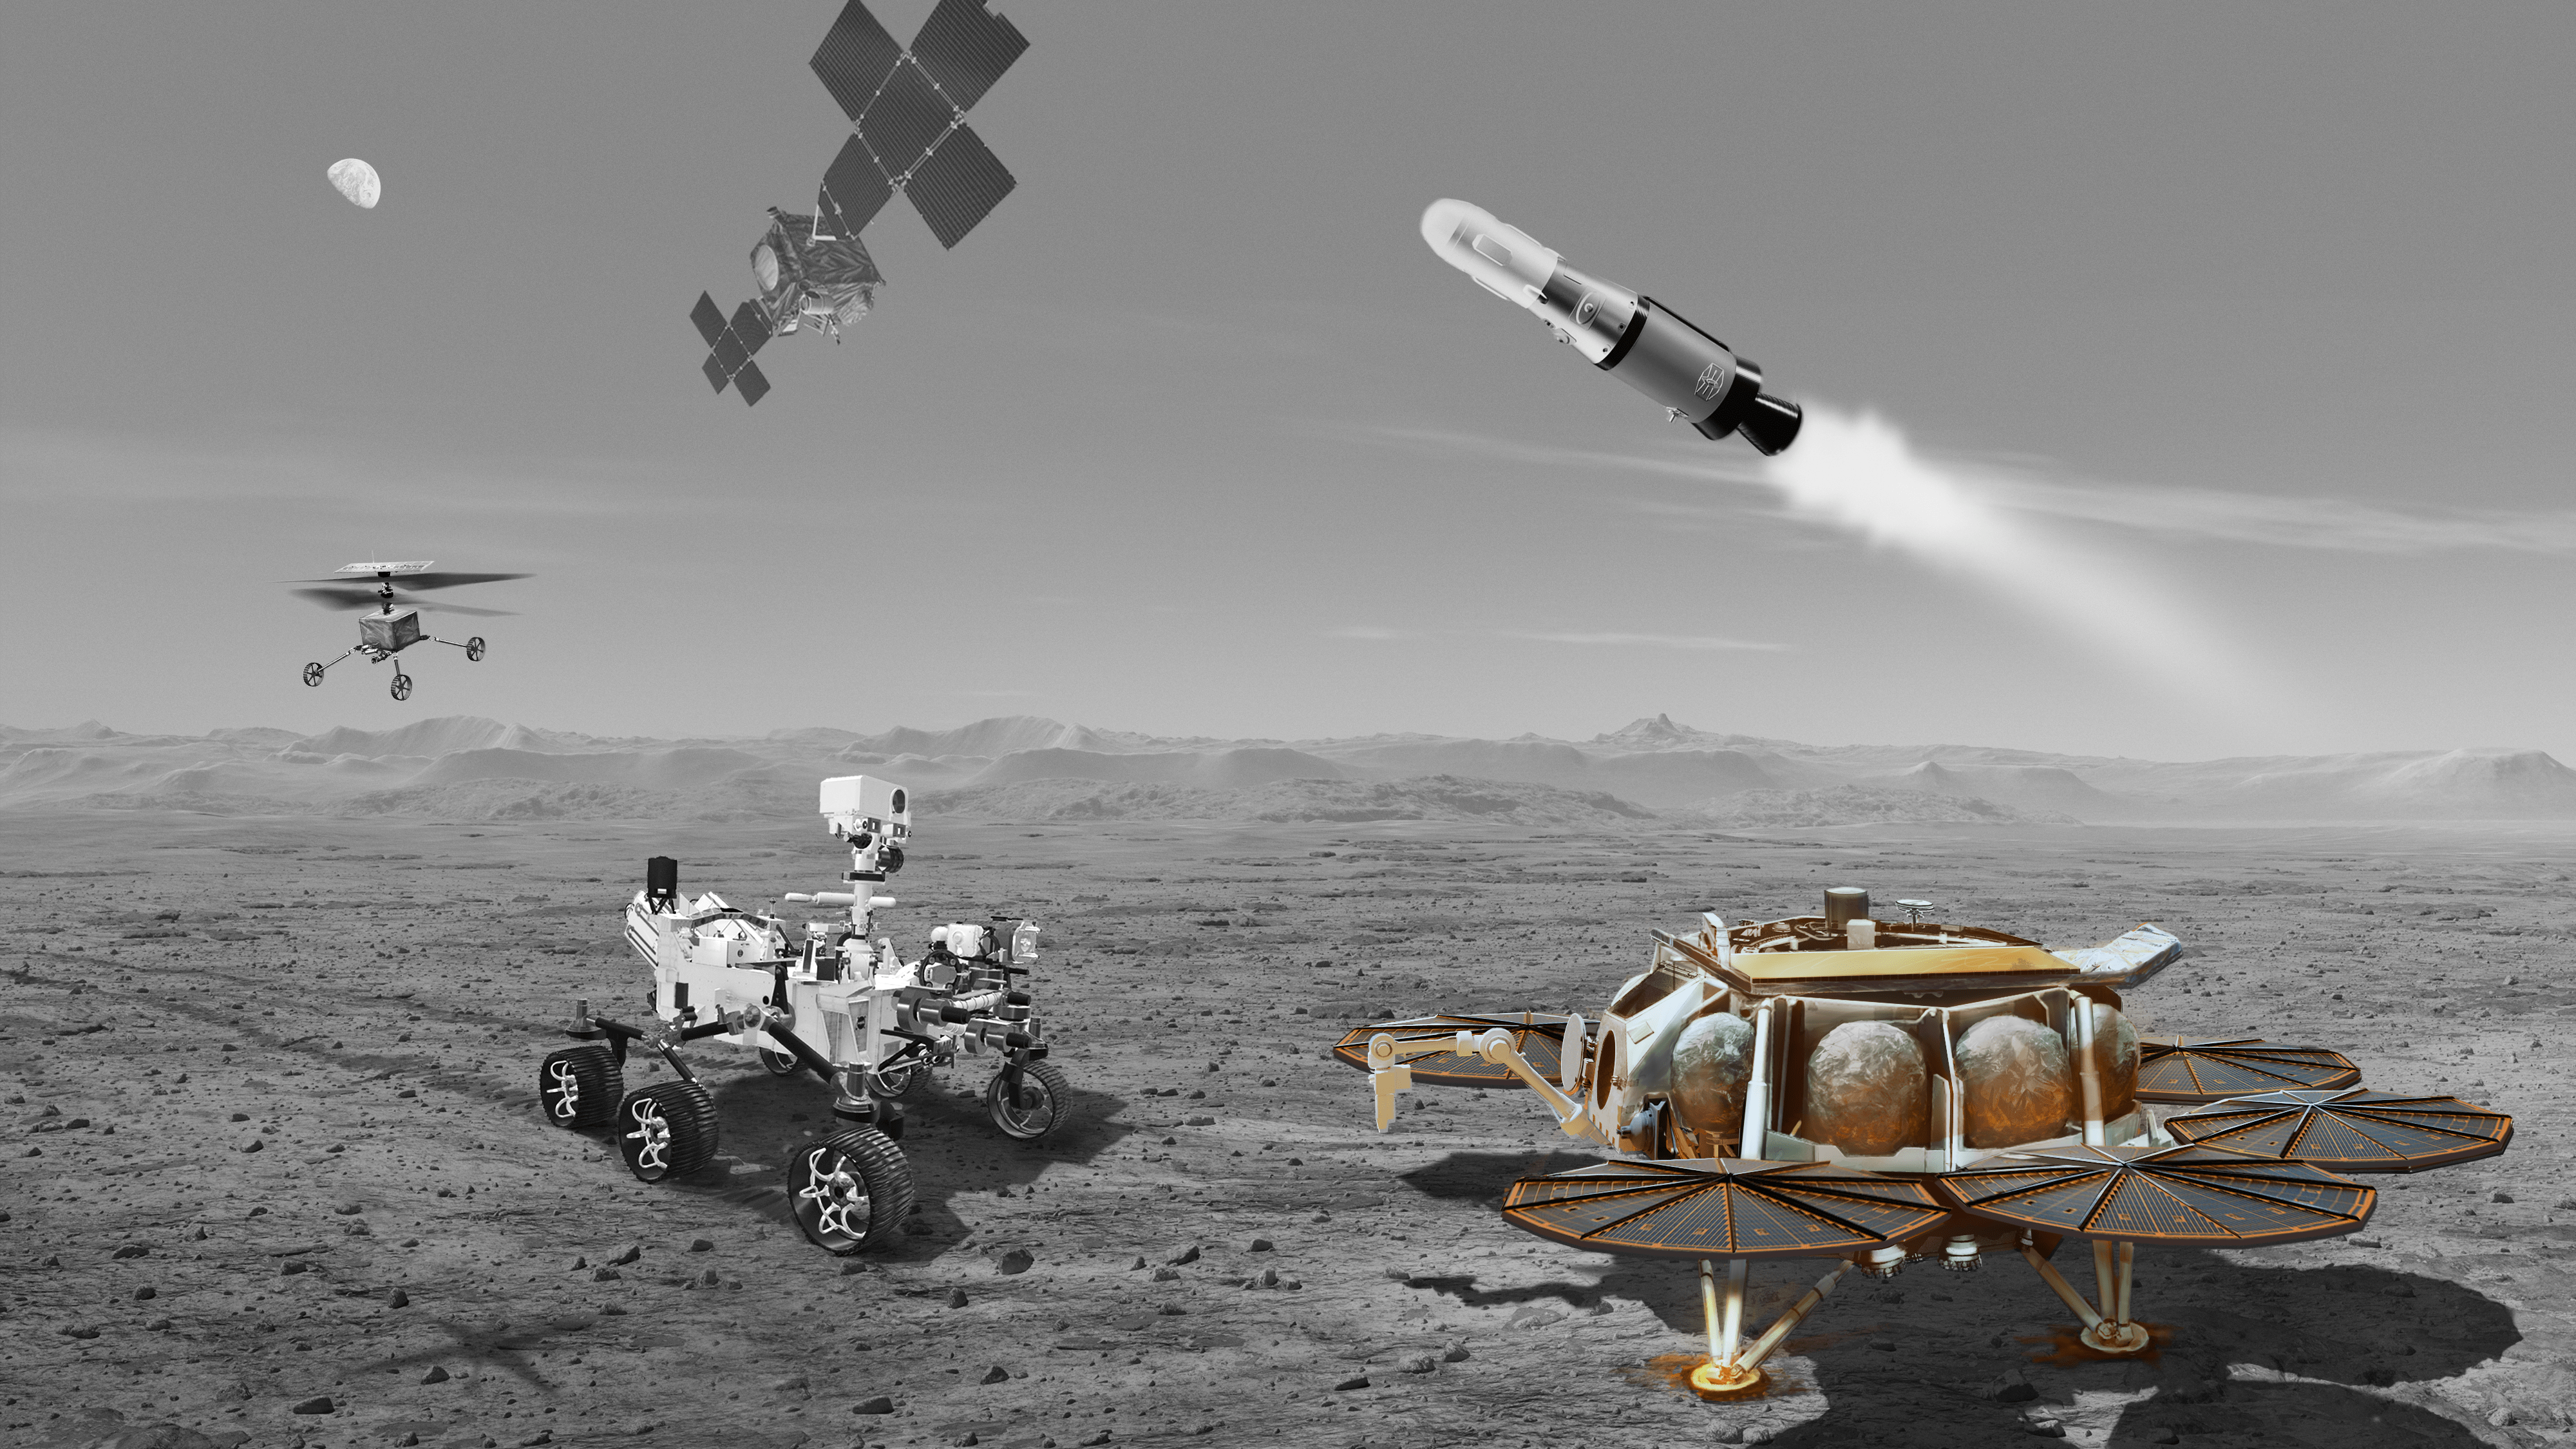 This image shows the five spacecraft that make up Mars Sample Return, a helicopter, an orbiter, a rocket, a rover and a landing platform. The Sample Return Lander platform is highlighted for emphasis.